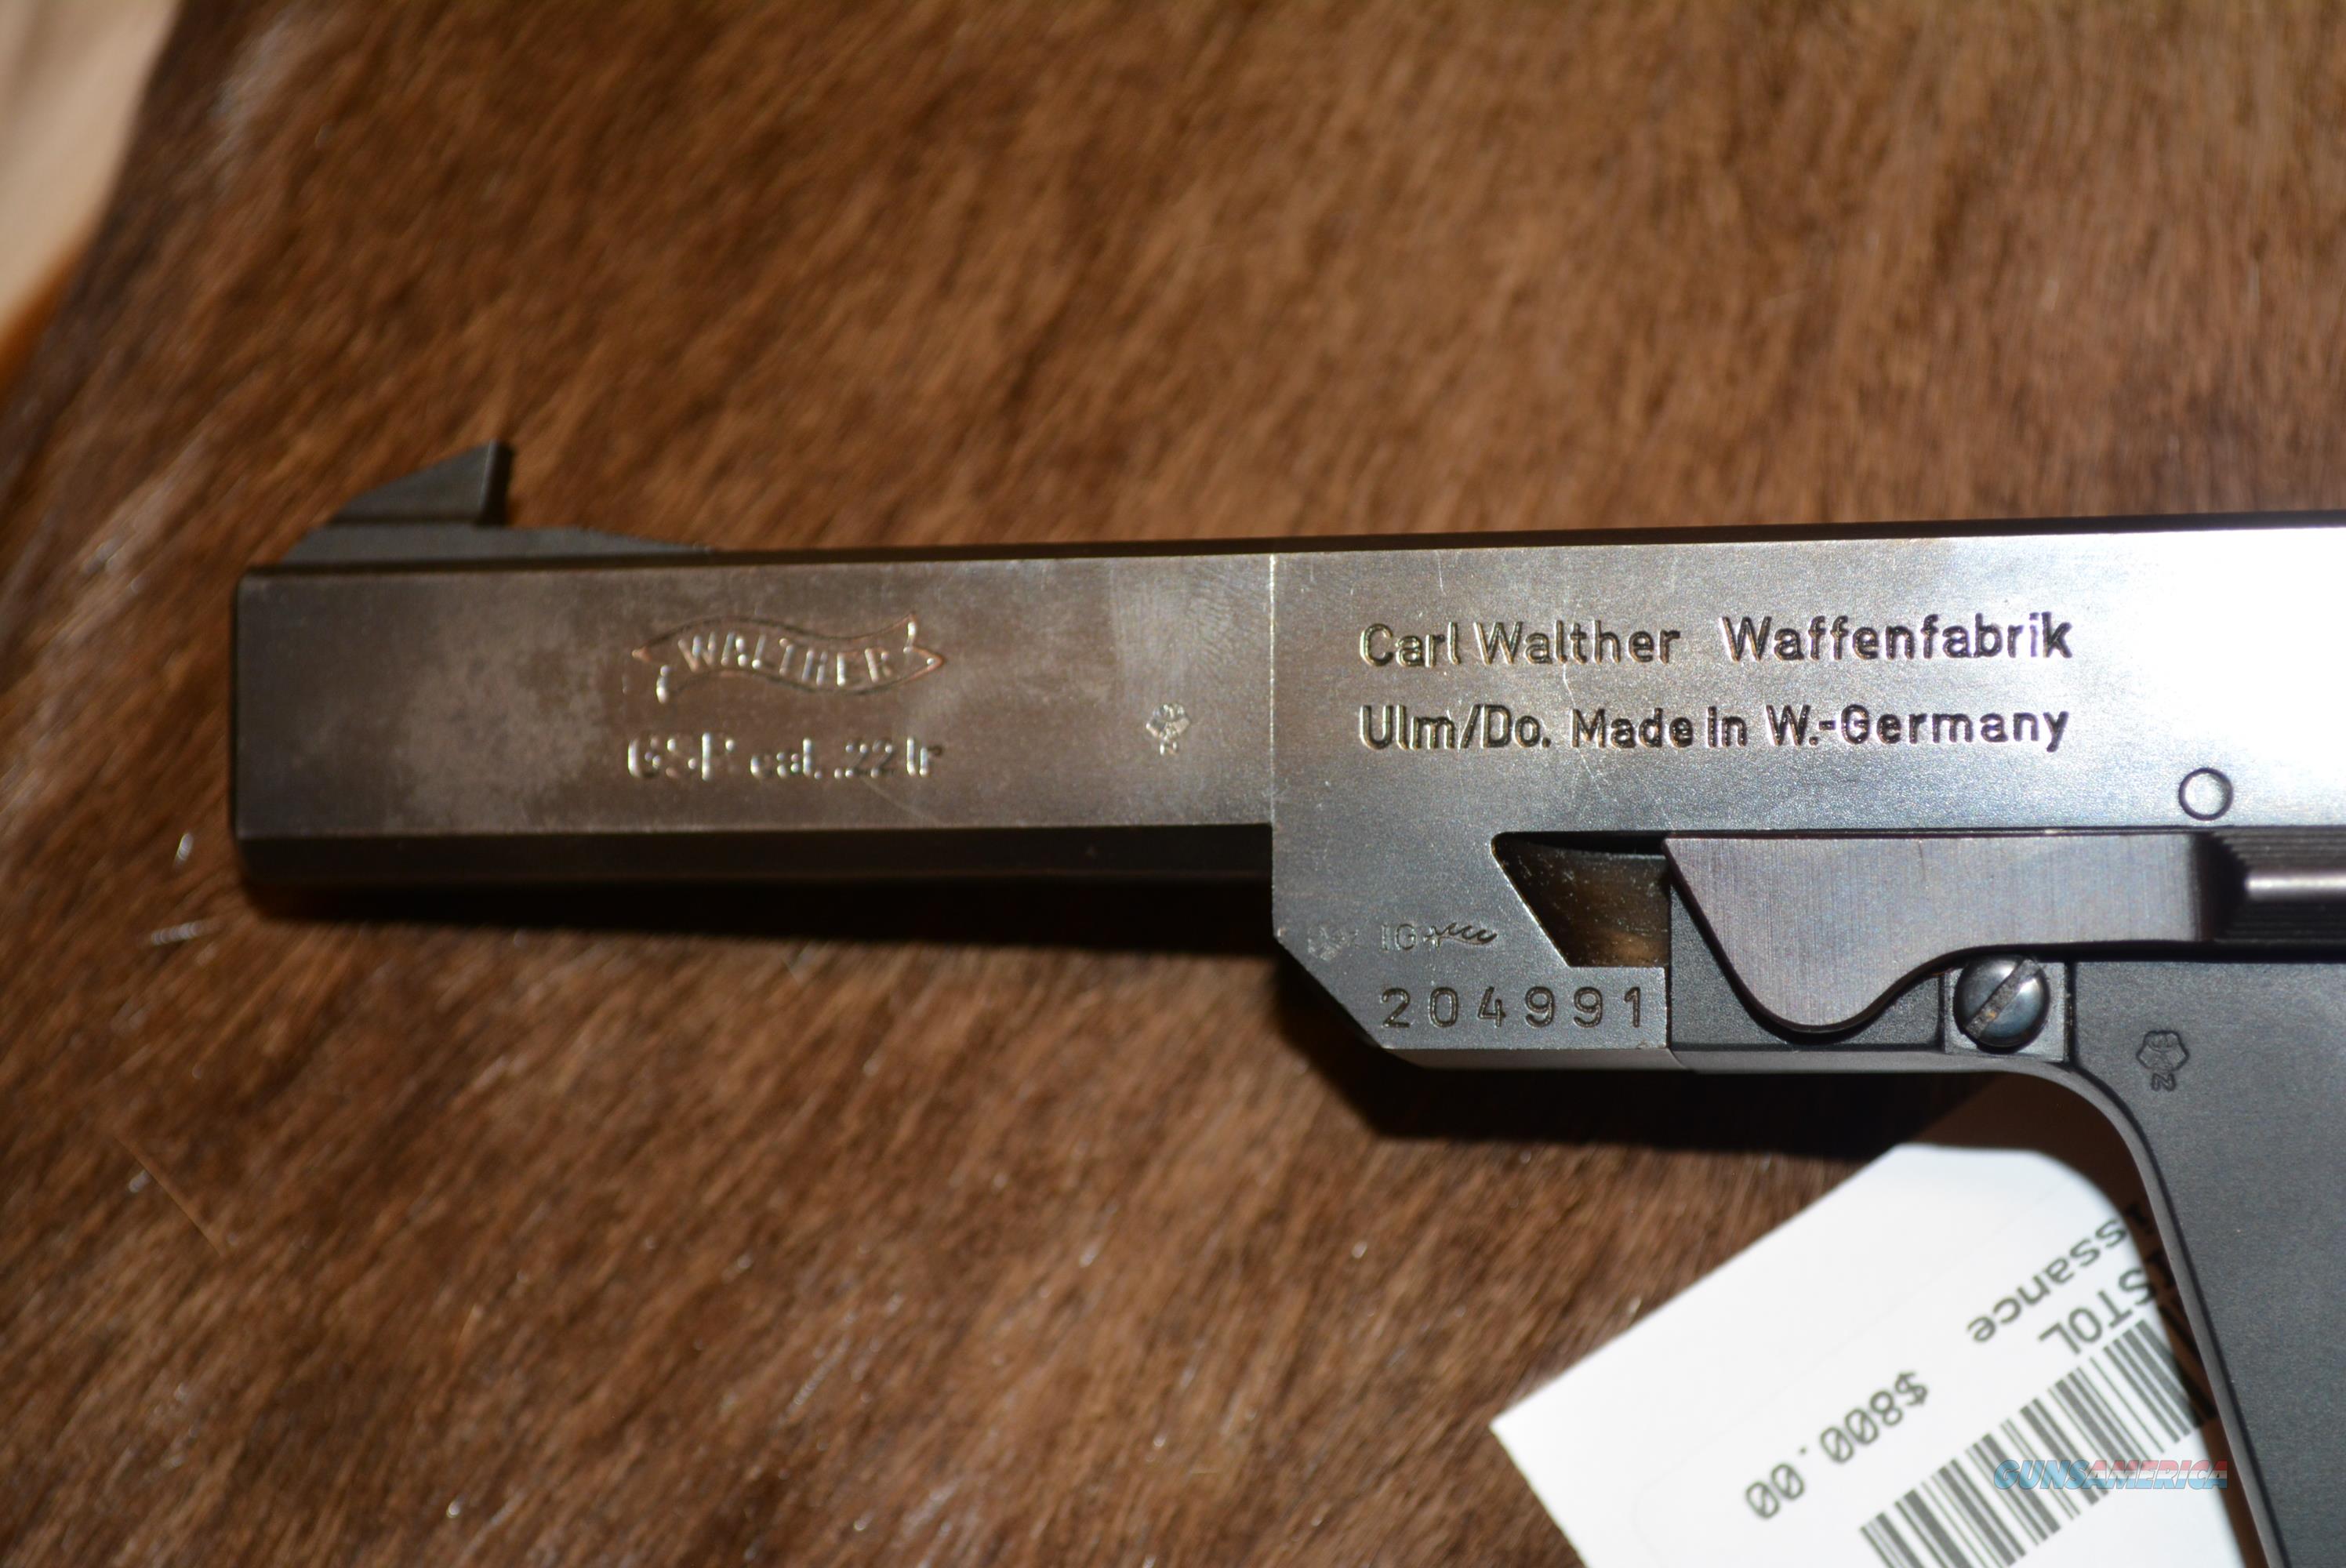 walther gsp and osp grip